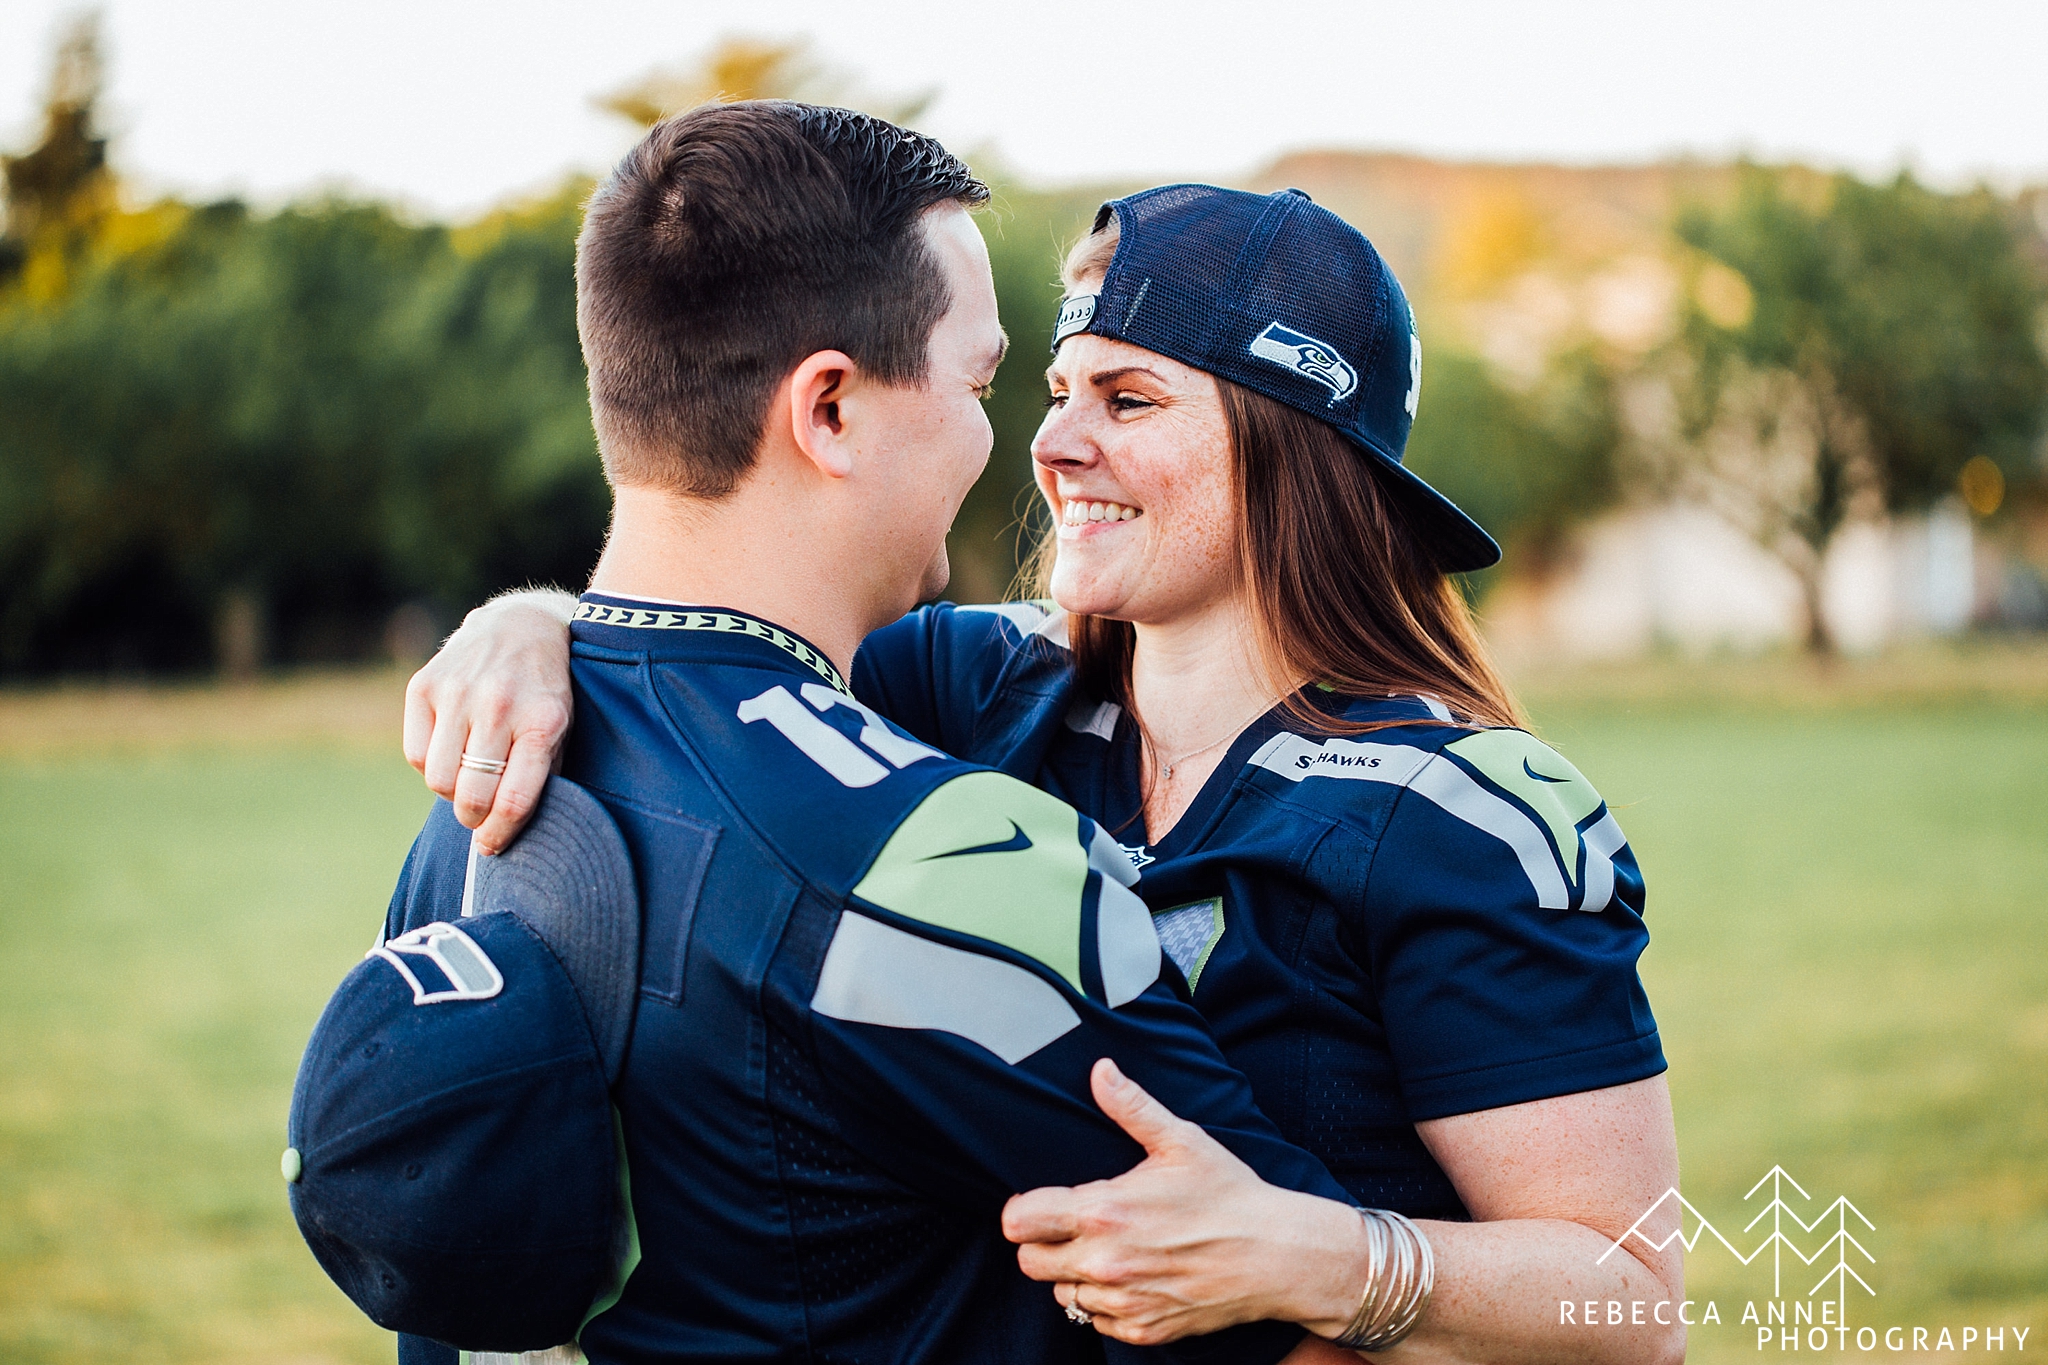 Orting Engagement,Orting Engagement Photos,Orting Engagement Photographer,Firefigher Engagement,Firehouse Engagement,Seattle Engagement Photographer,Seattle Engagement Photography,Seattle Engagement Photos,Washington Engagement Photographer,PNW Engagement Photographer,